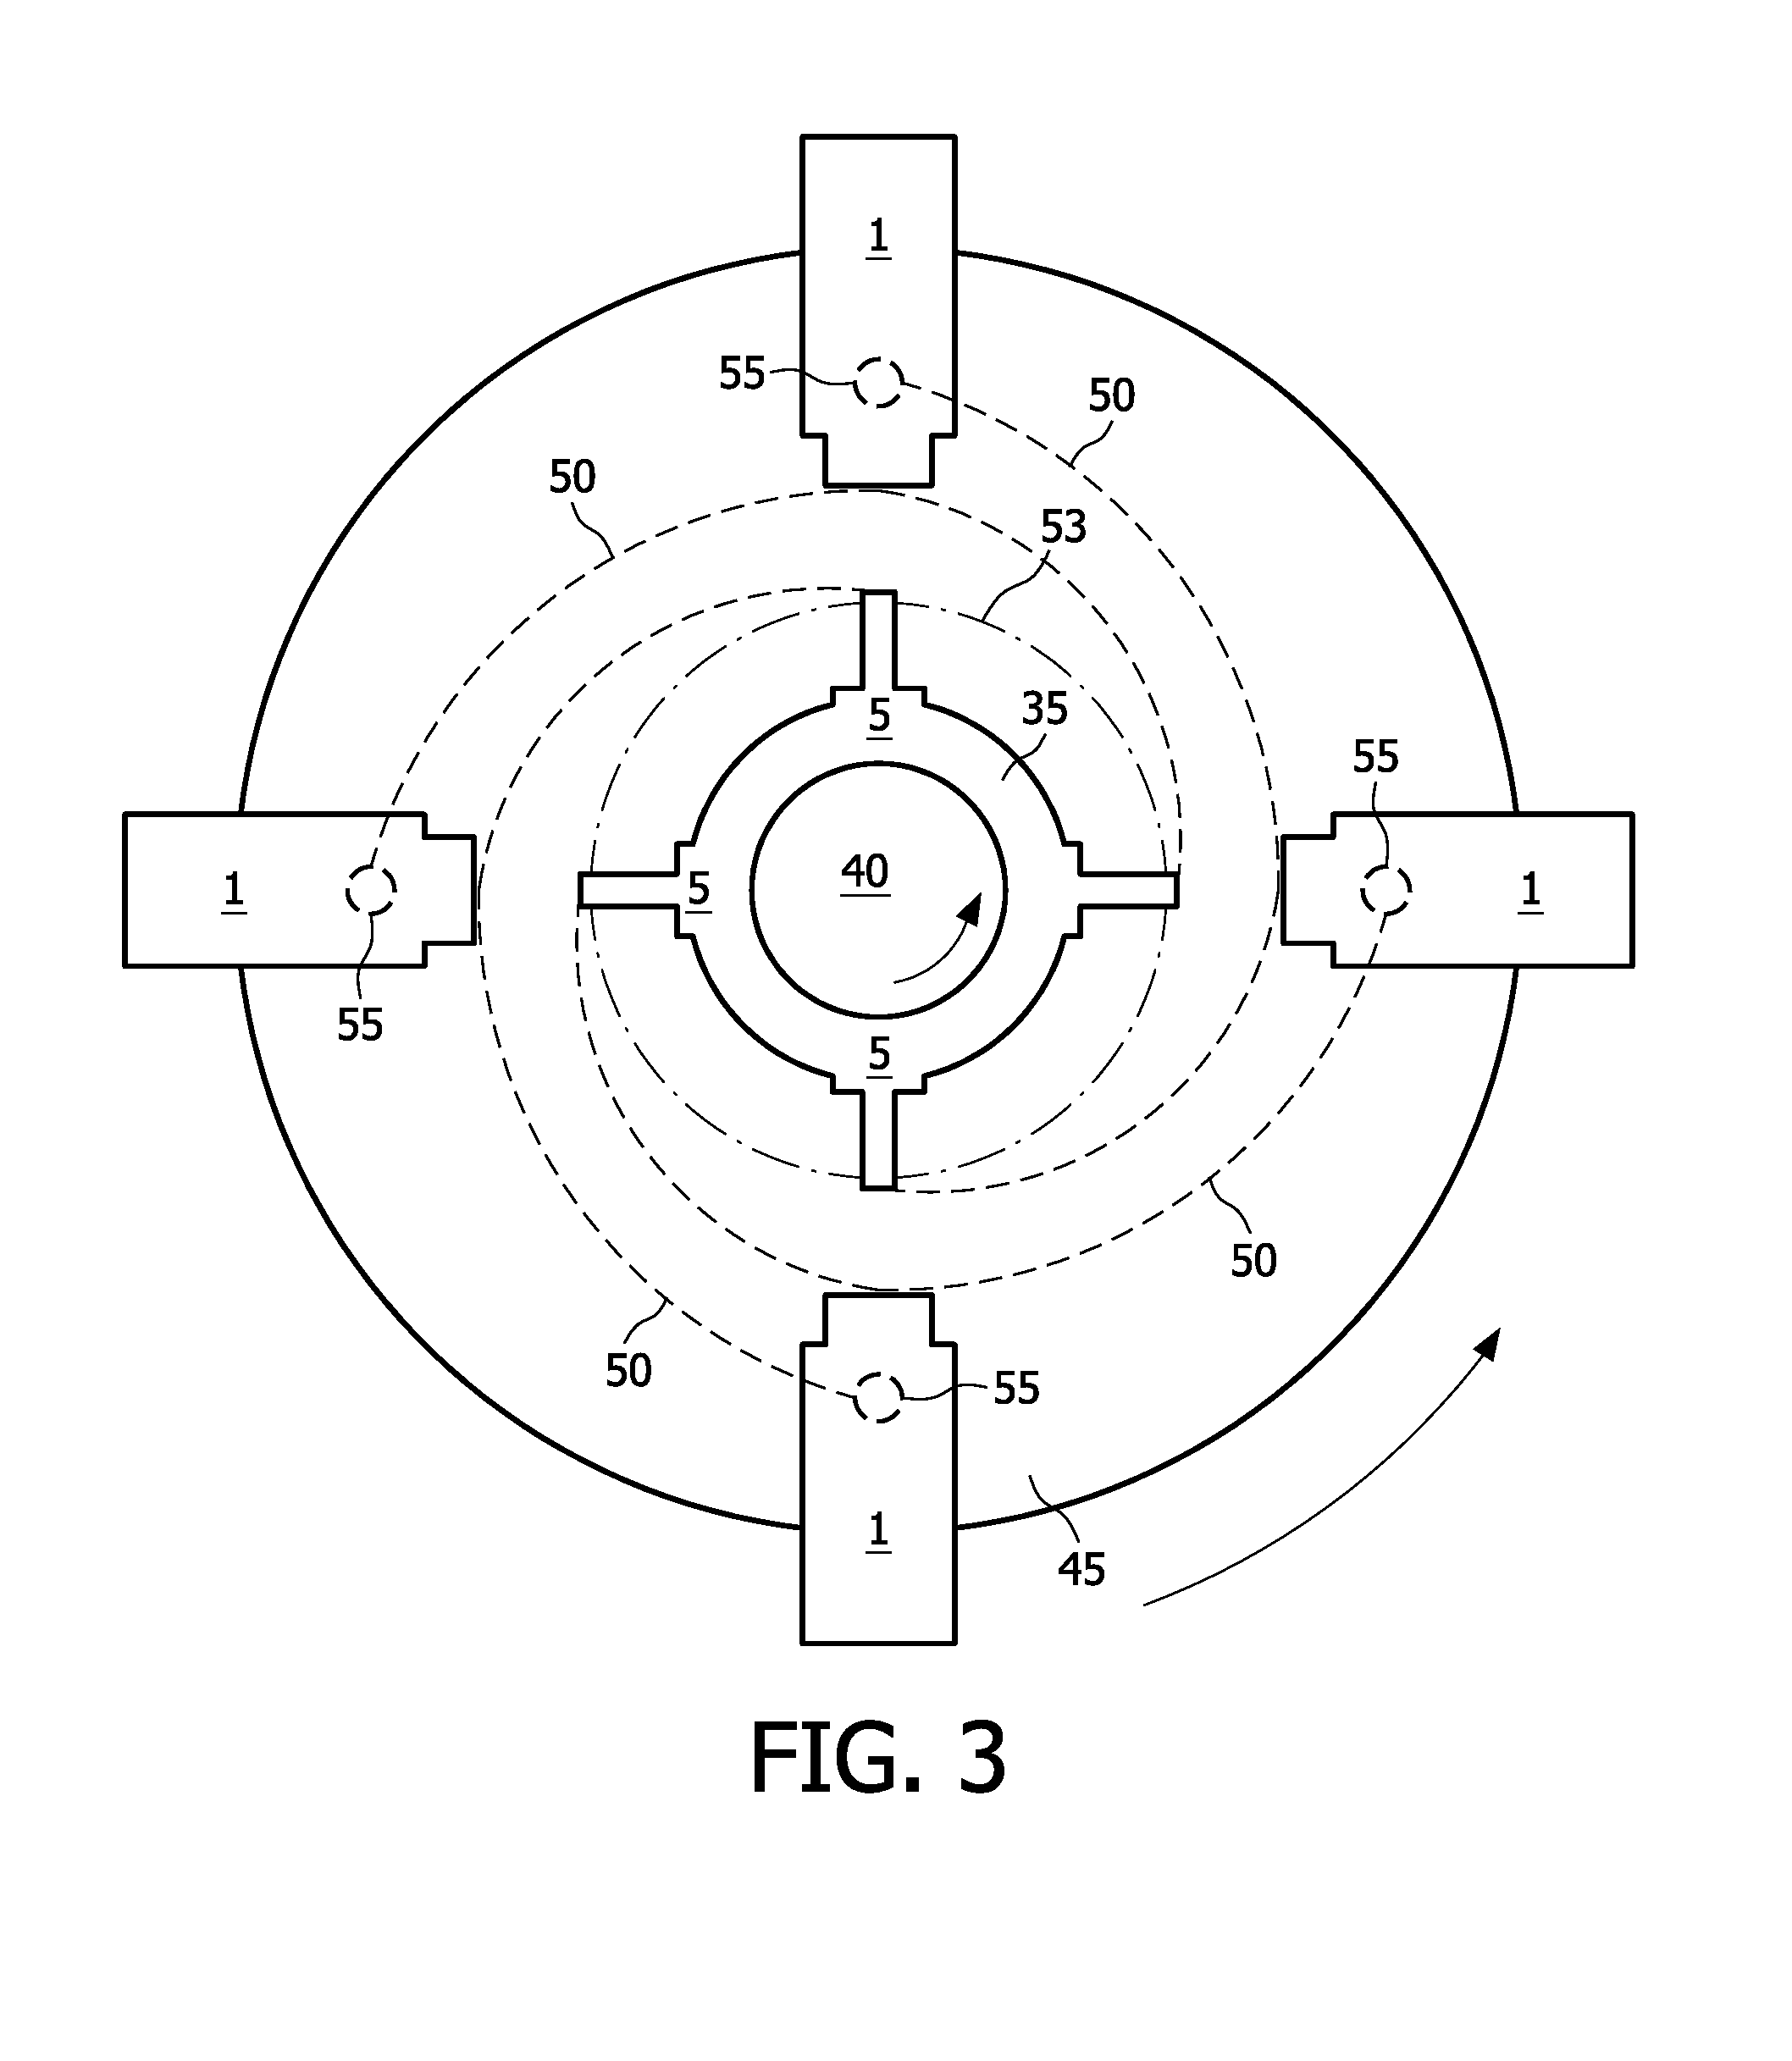 Device for use in molecular diagnostics testing